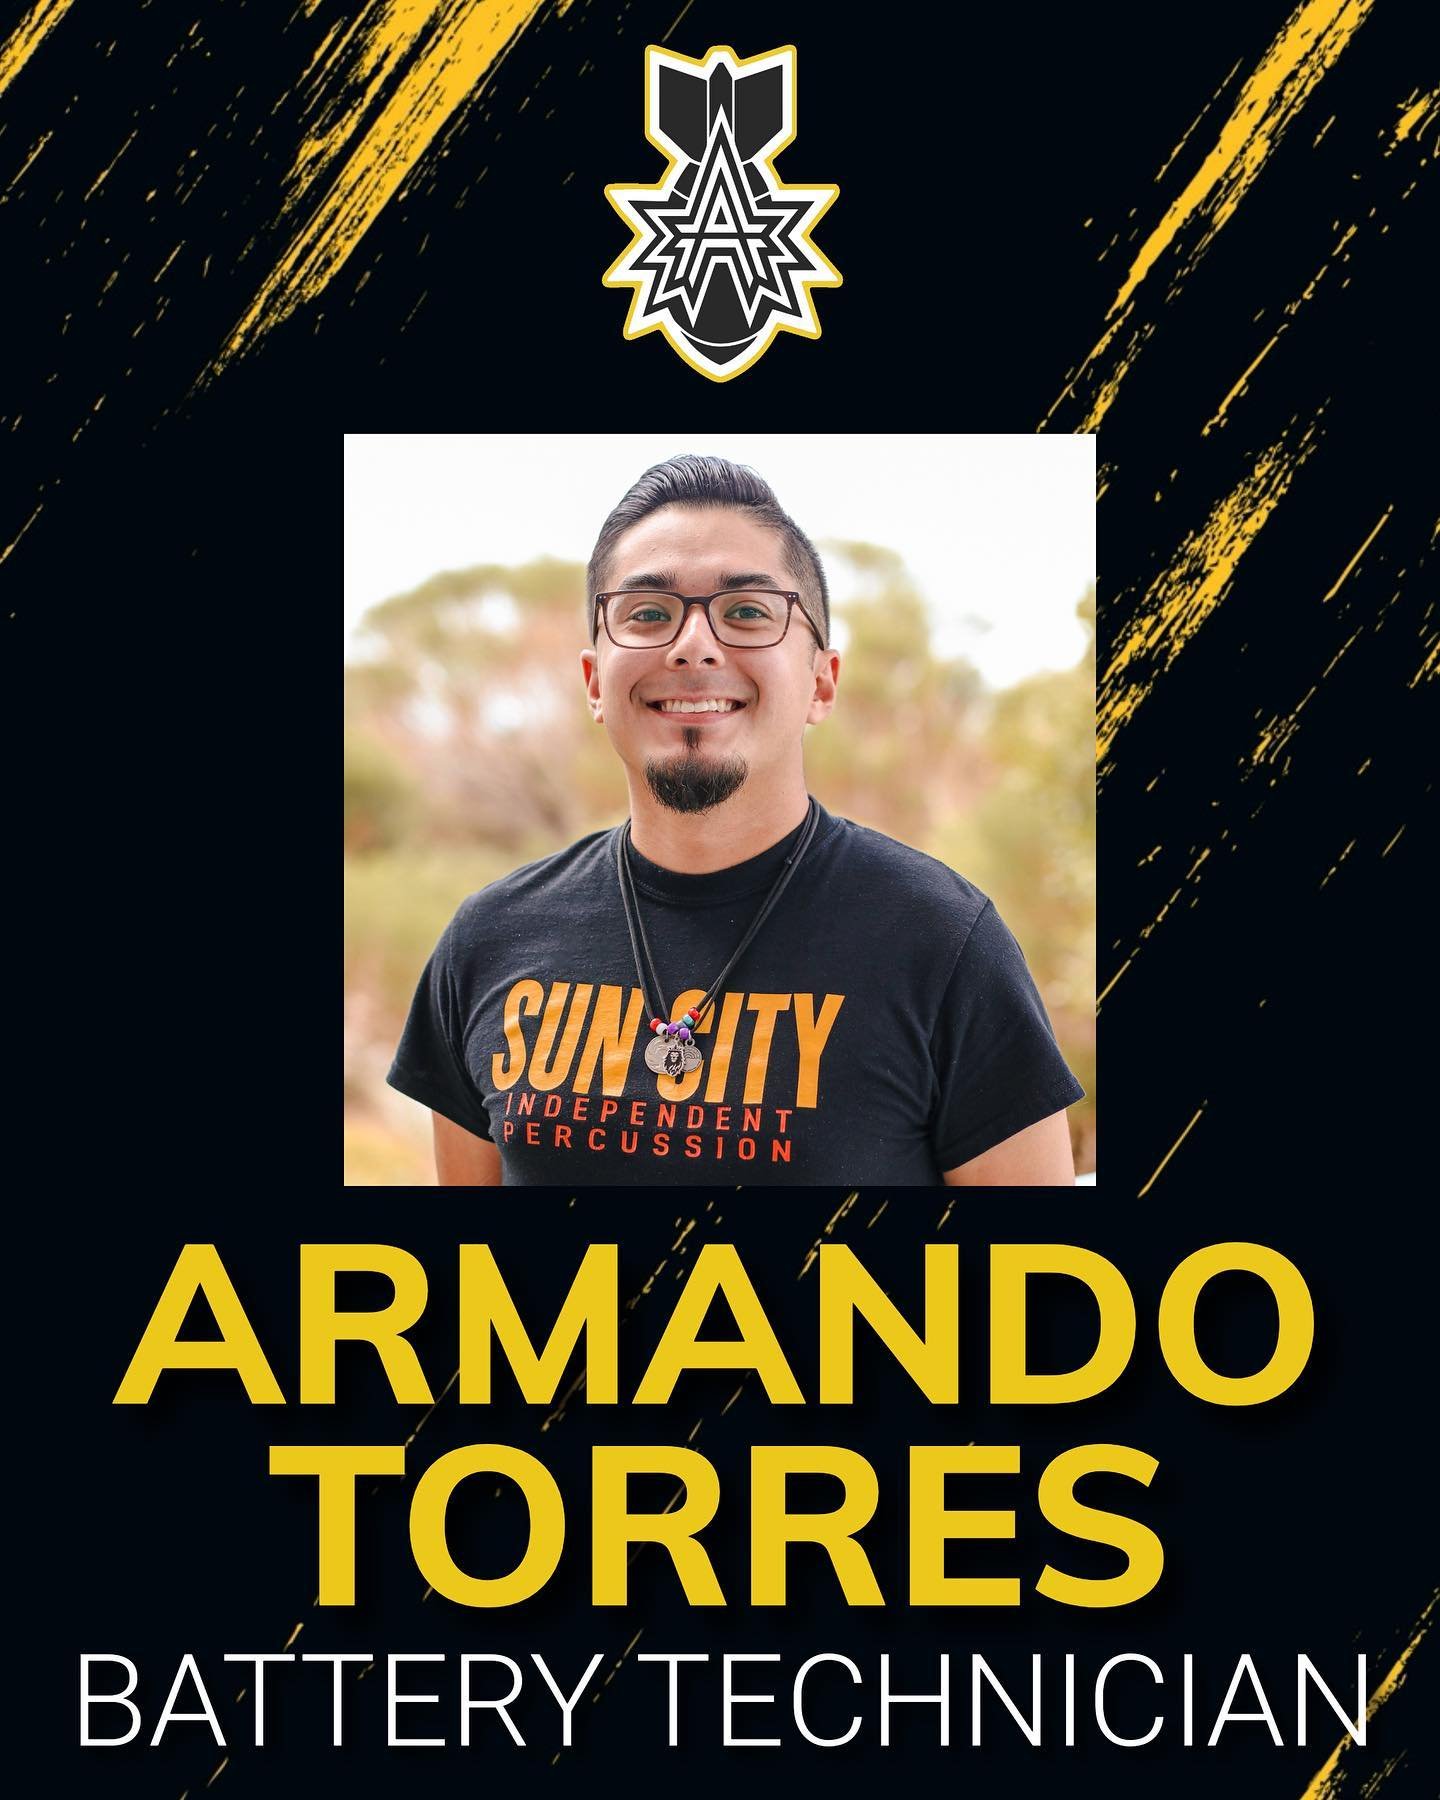 Next on Arsenal&rsquo;s 2024 percussion staff is Battery Technician, Armando Torres! 💥

Armando Torres is an El Paso, Texas native percussionist and music educator. He will be completing his Bachelor&rsquo;s Degree in Music Education at the Universi